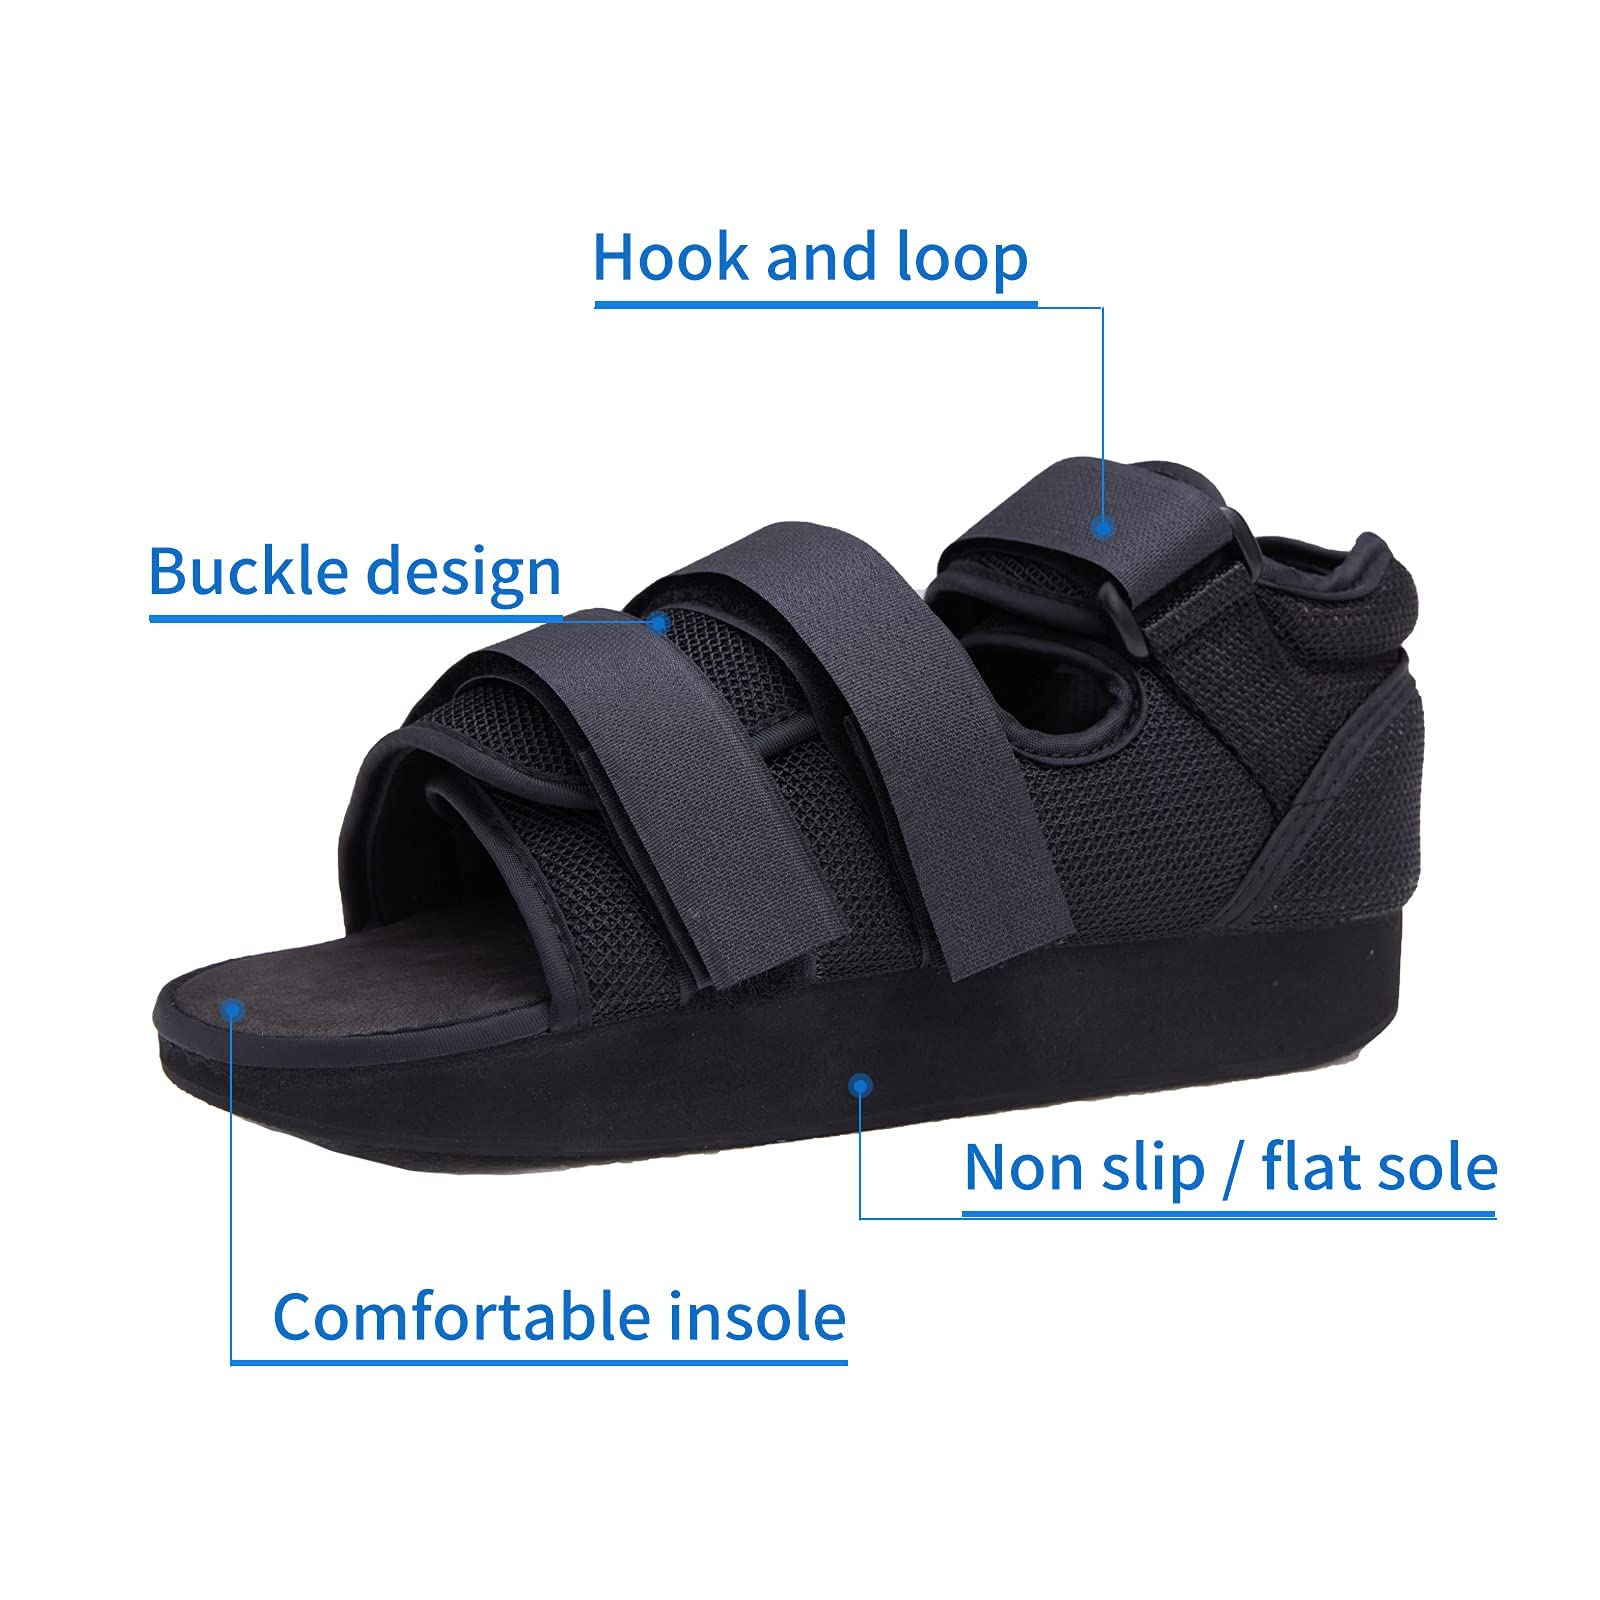 Post Op Shoe - Lightweight Medical Walking Shoes with Adjustable Strap - Orthopedic Recovery Cast Shoe for Post Surgery, Fractured Foot, Injured Toes, Stress Fracture, Sprains - Left or Right Foot - image 4 of 7